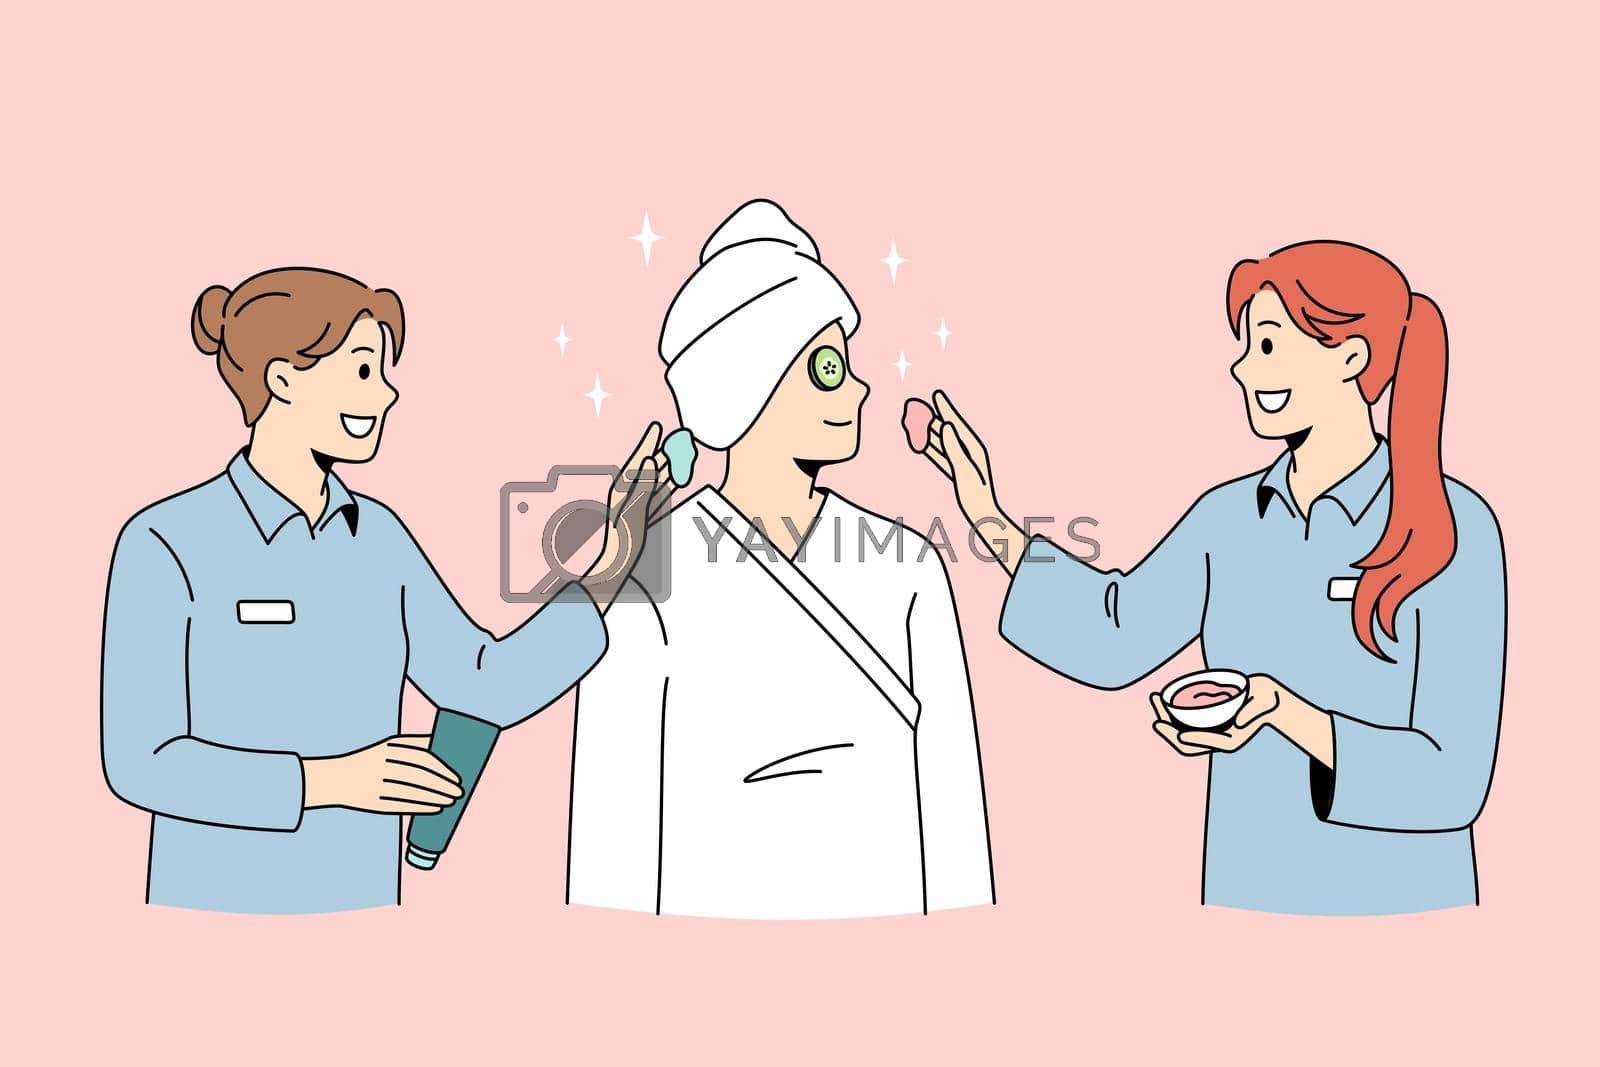 Beauty spa and cosmetology concept. Smiling women dermatologists wellness workers standing taking care of female client skin making beauty treatments vector illustration